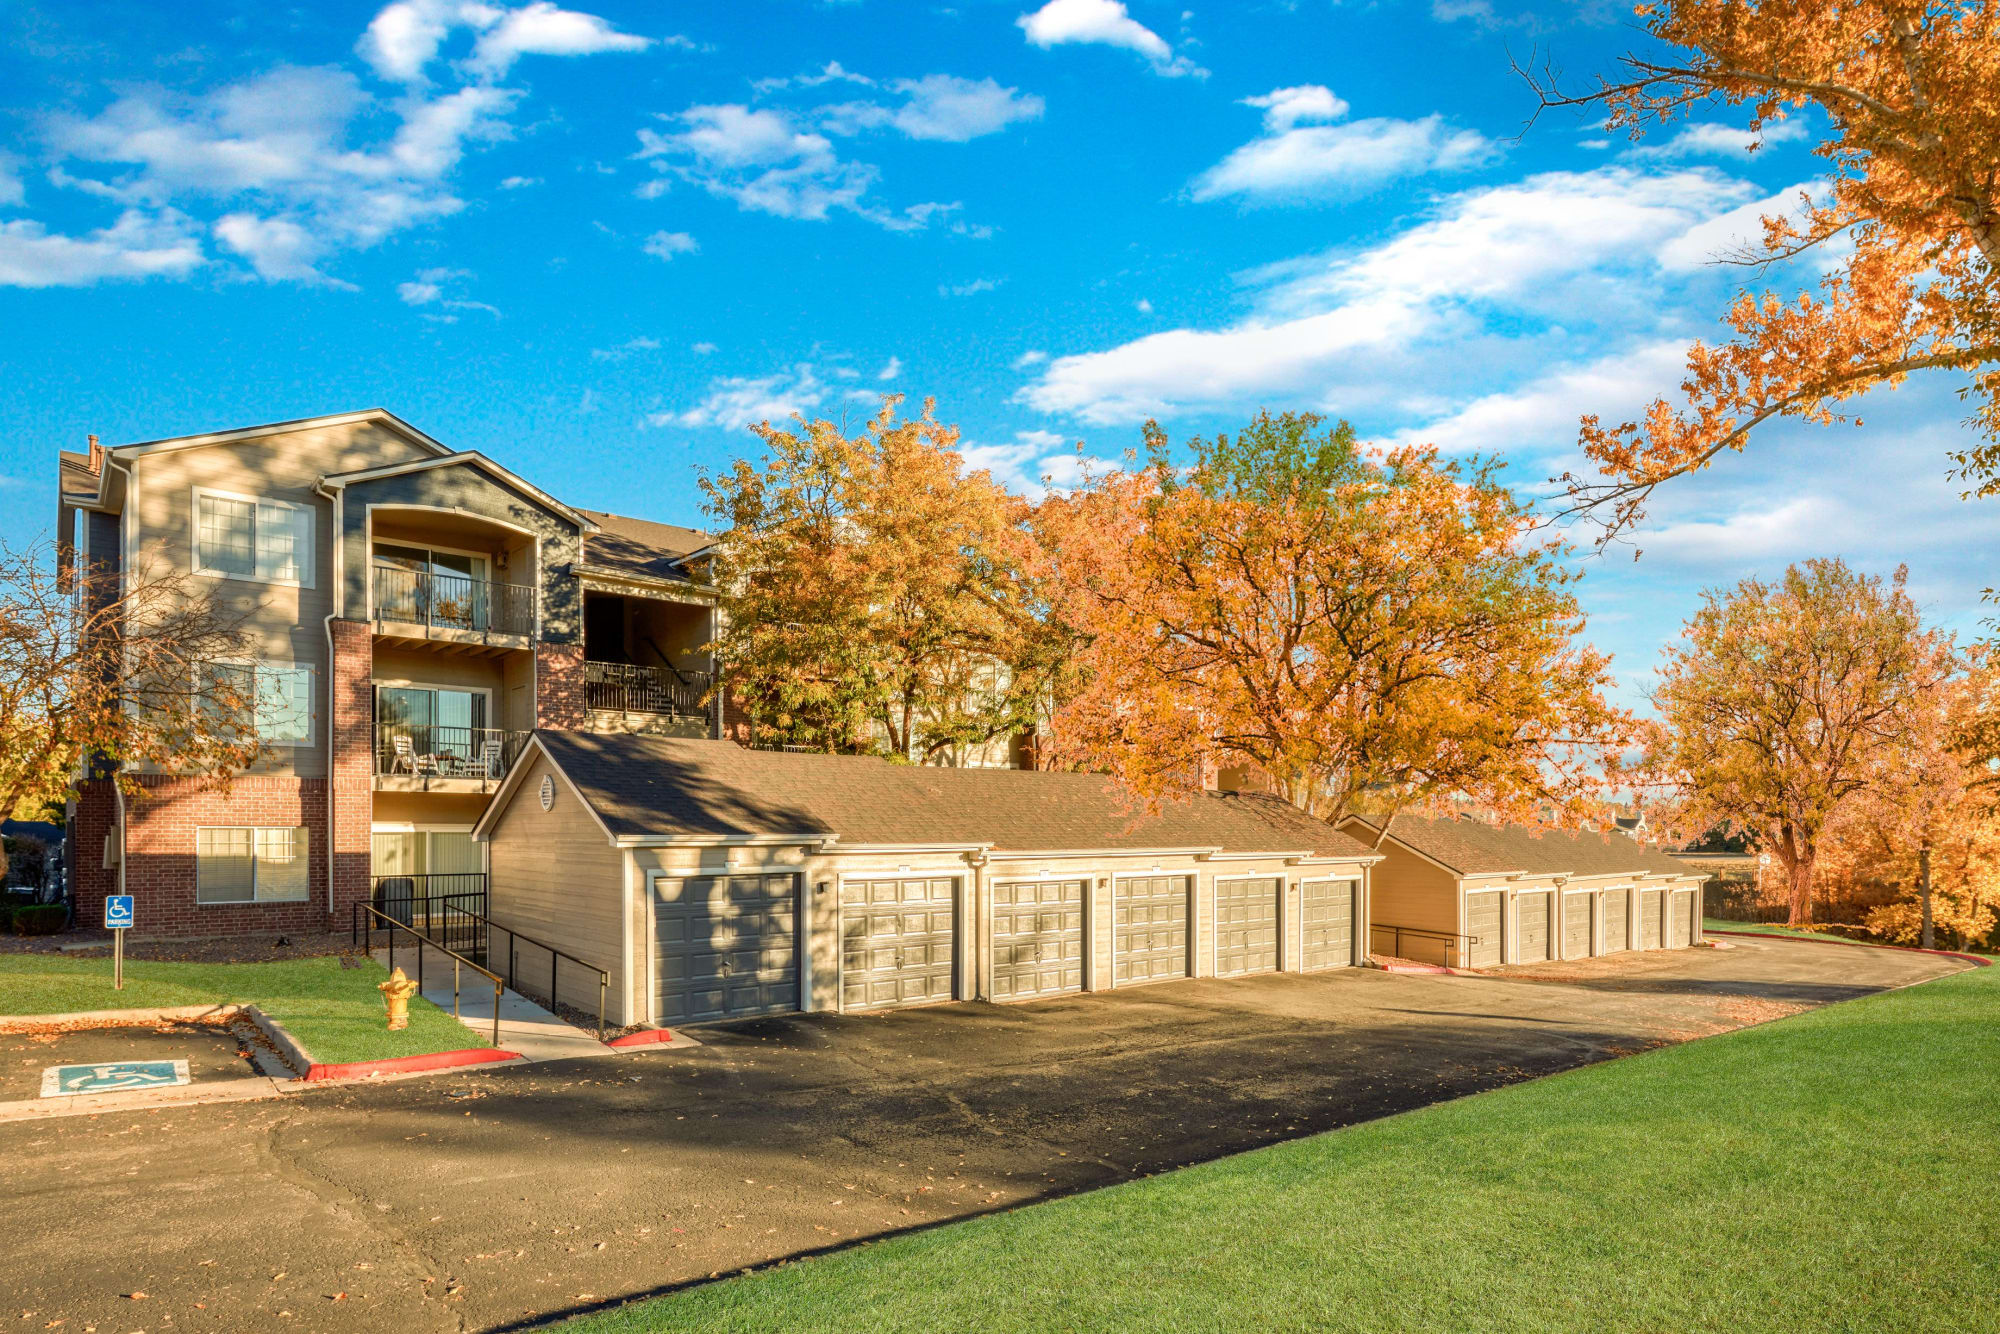 The exterior of the building surrounded by lush landscaping at The Crossings at Bear Creek Apartments in Lakewood, Colorado